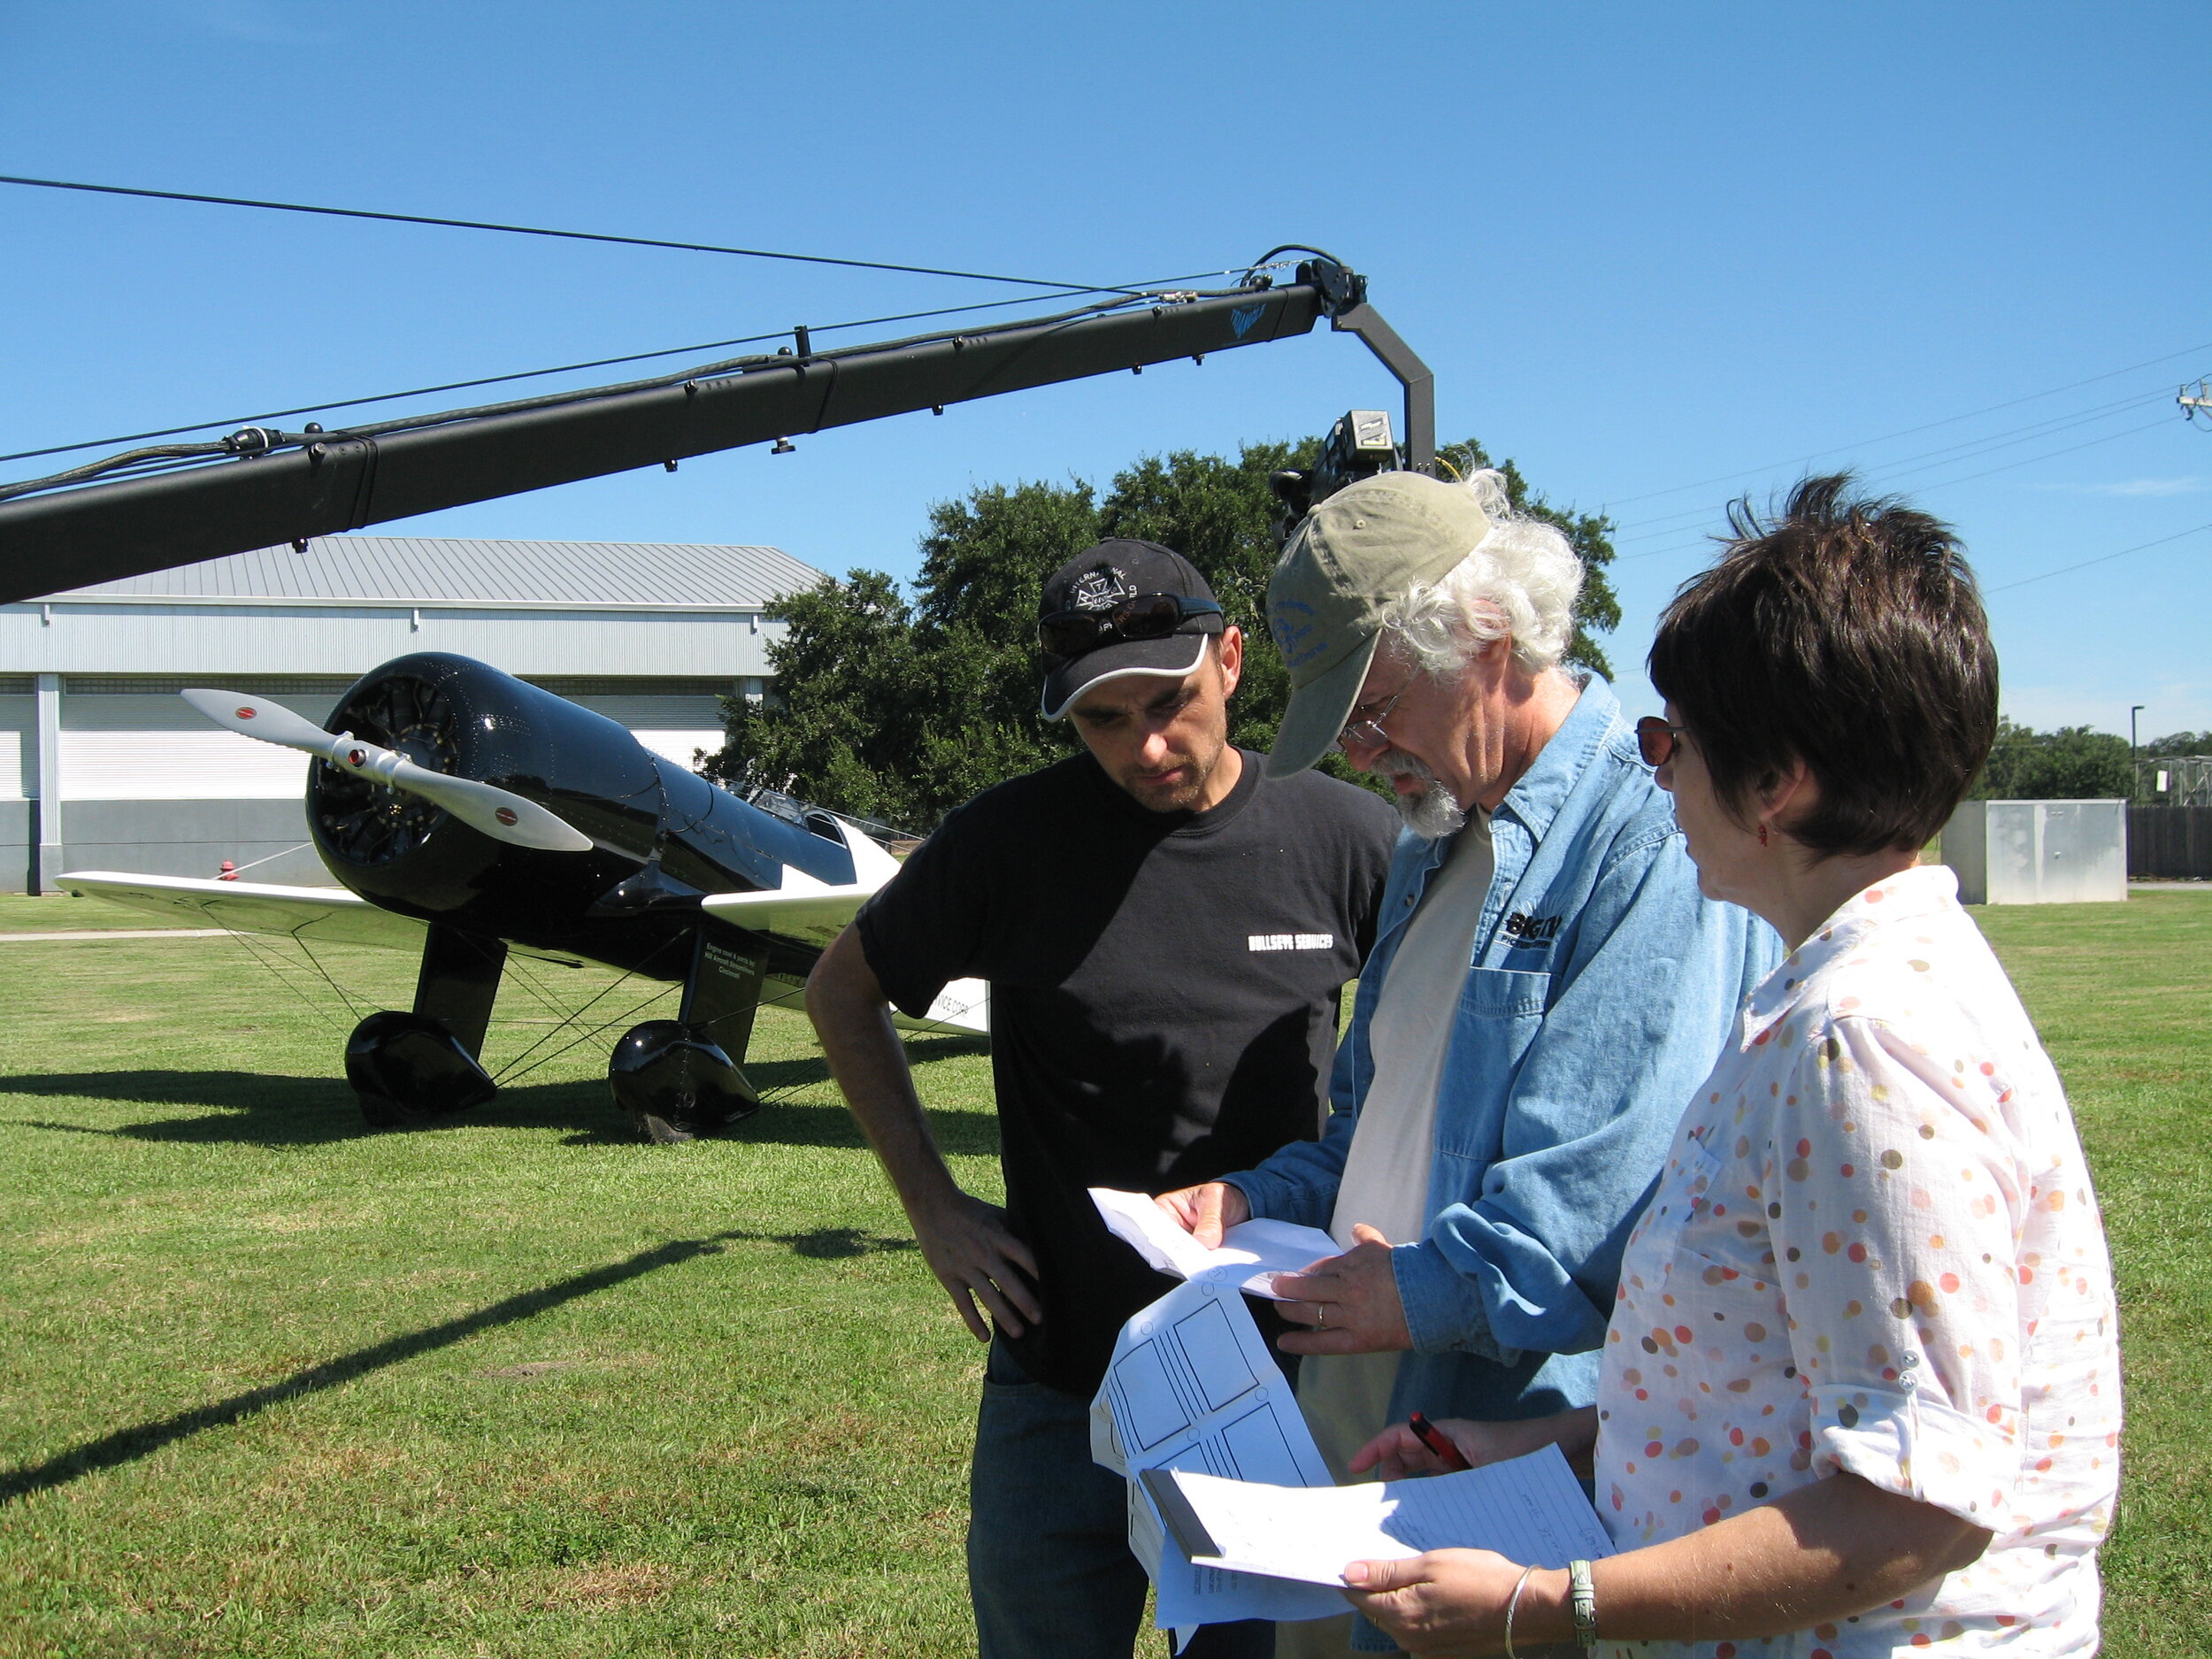 Checking the shot list for Wedell Williams Aviation Museum with DP Simon Carmody